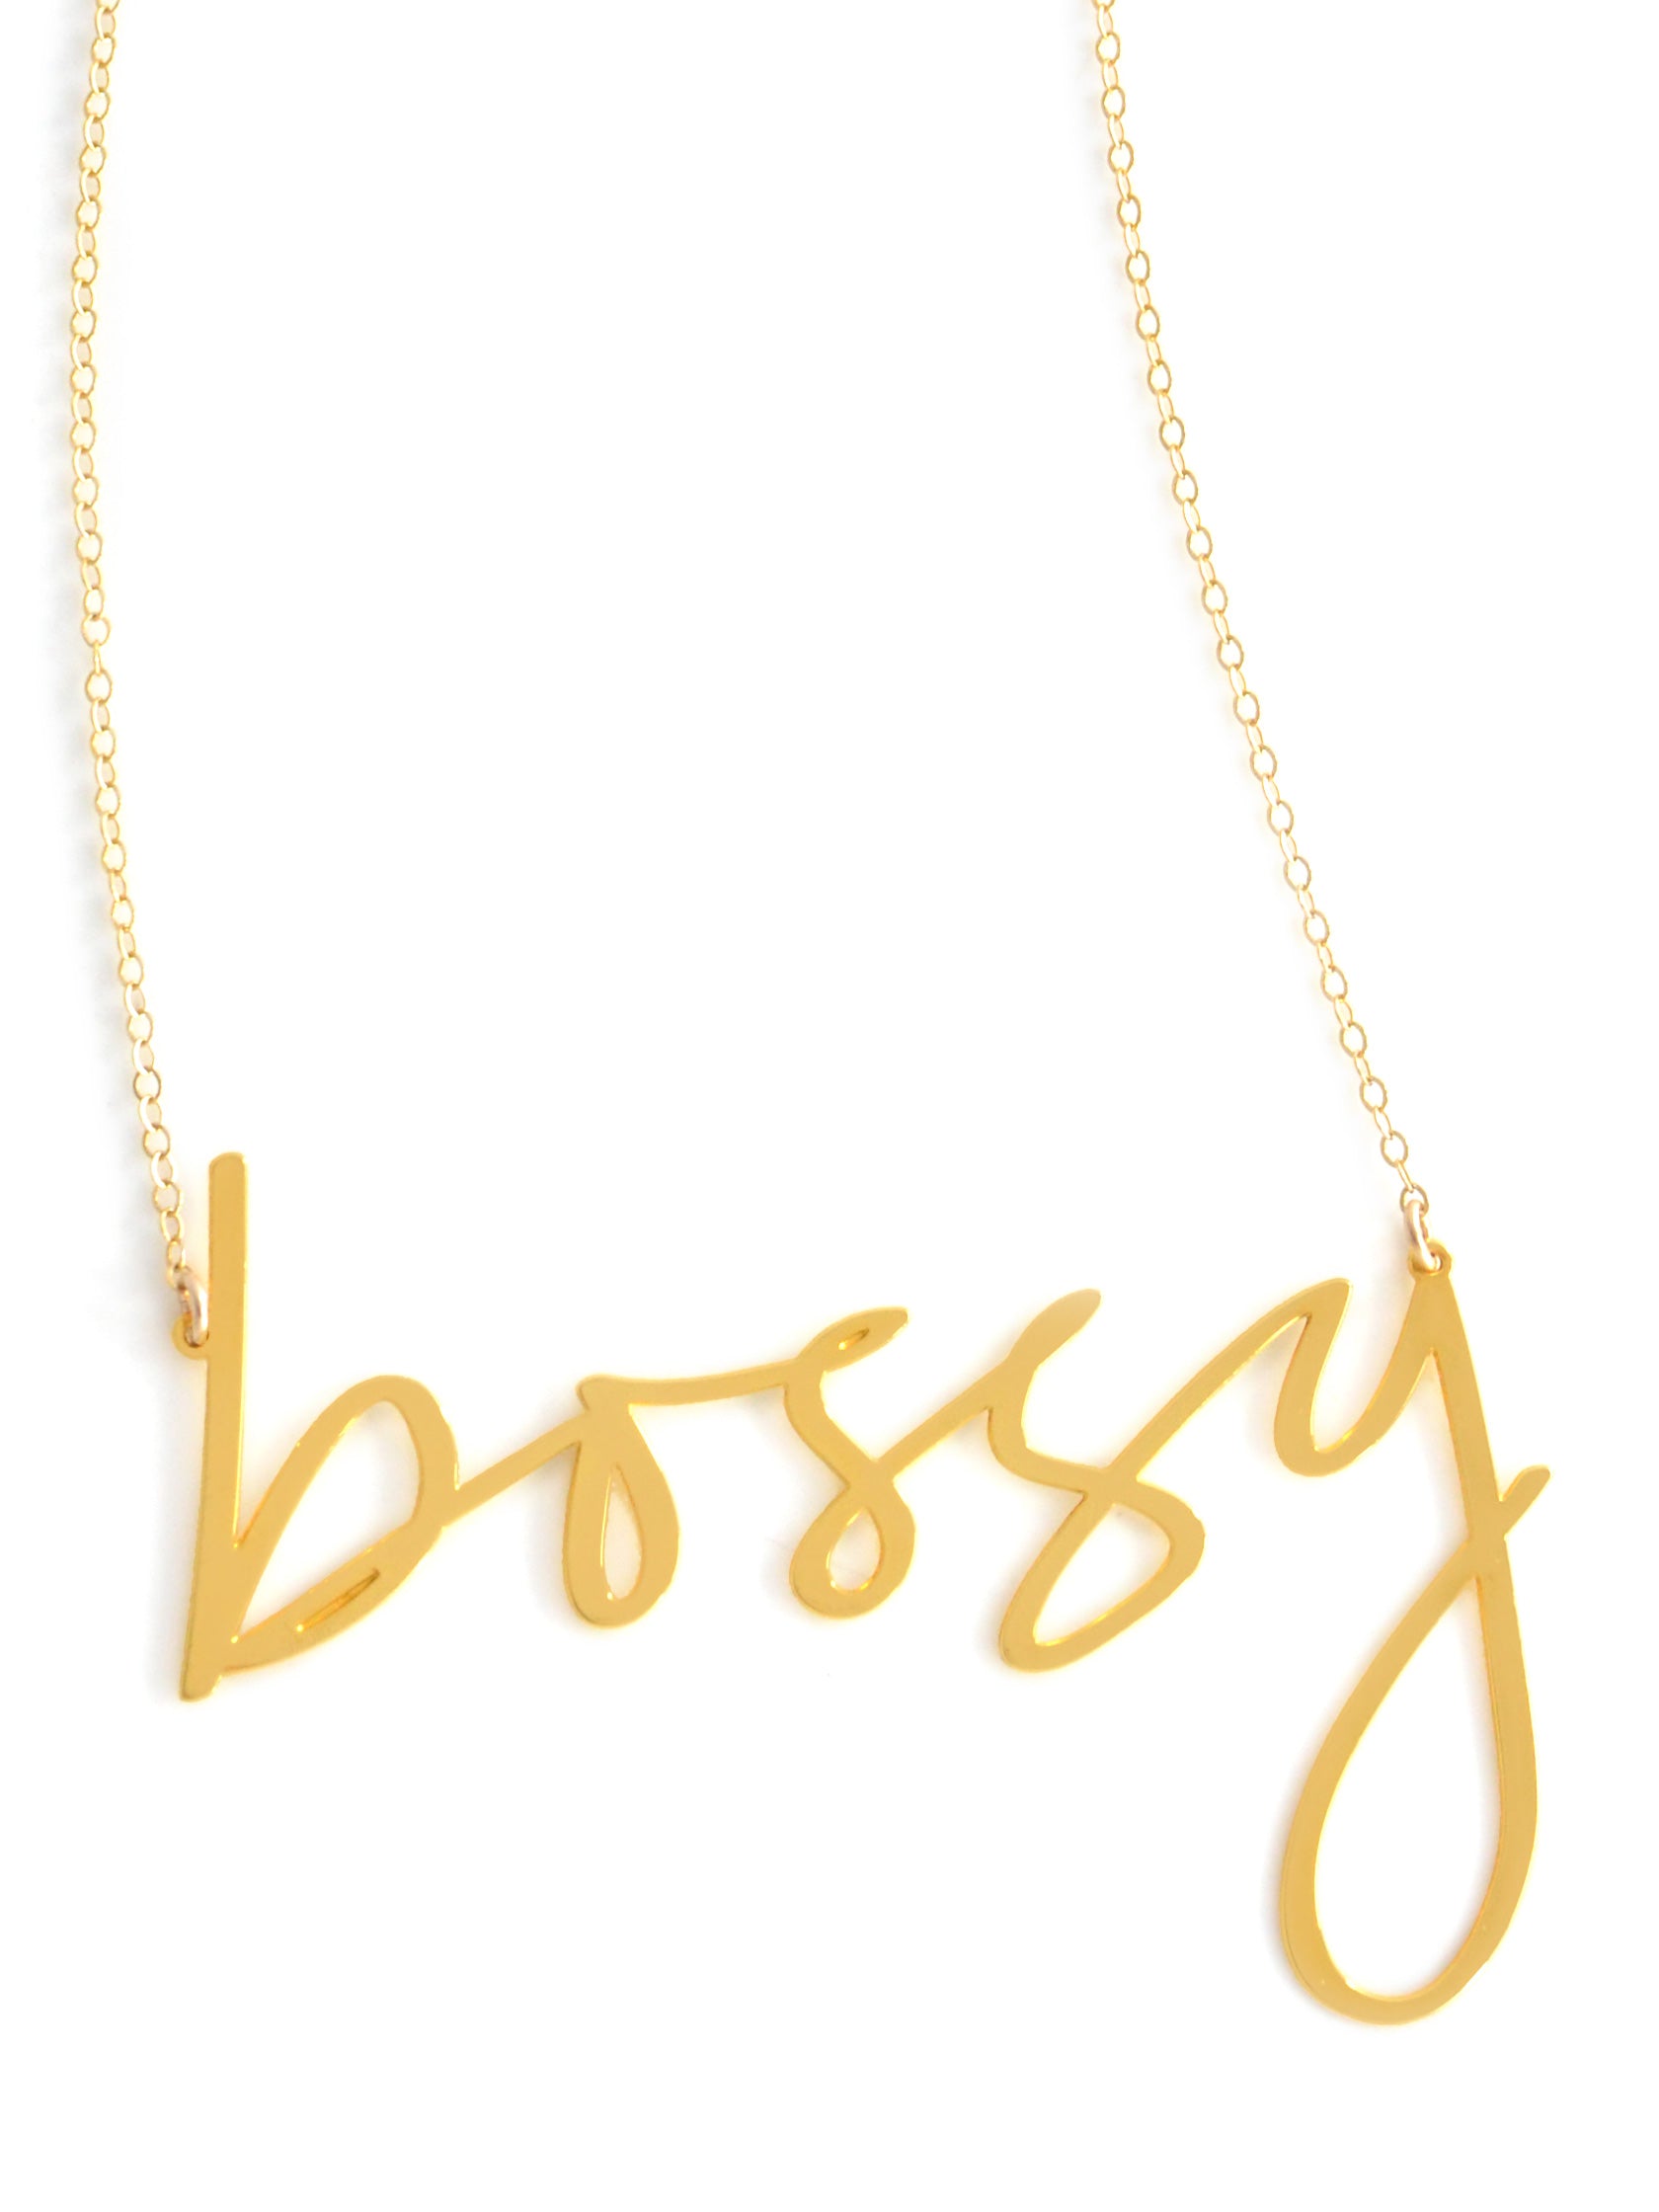 Bossy Necklace - High Quality, Affordable, Hand Written, Empowering, Self Love, Mantra Word Necklace - Available in Gold and Silver - Small and Large Sizes - Made in USA - Brevity Jewelry